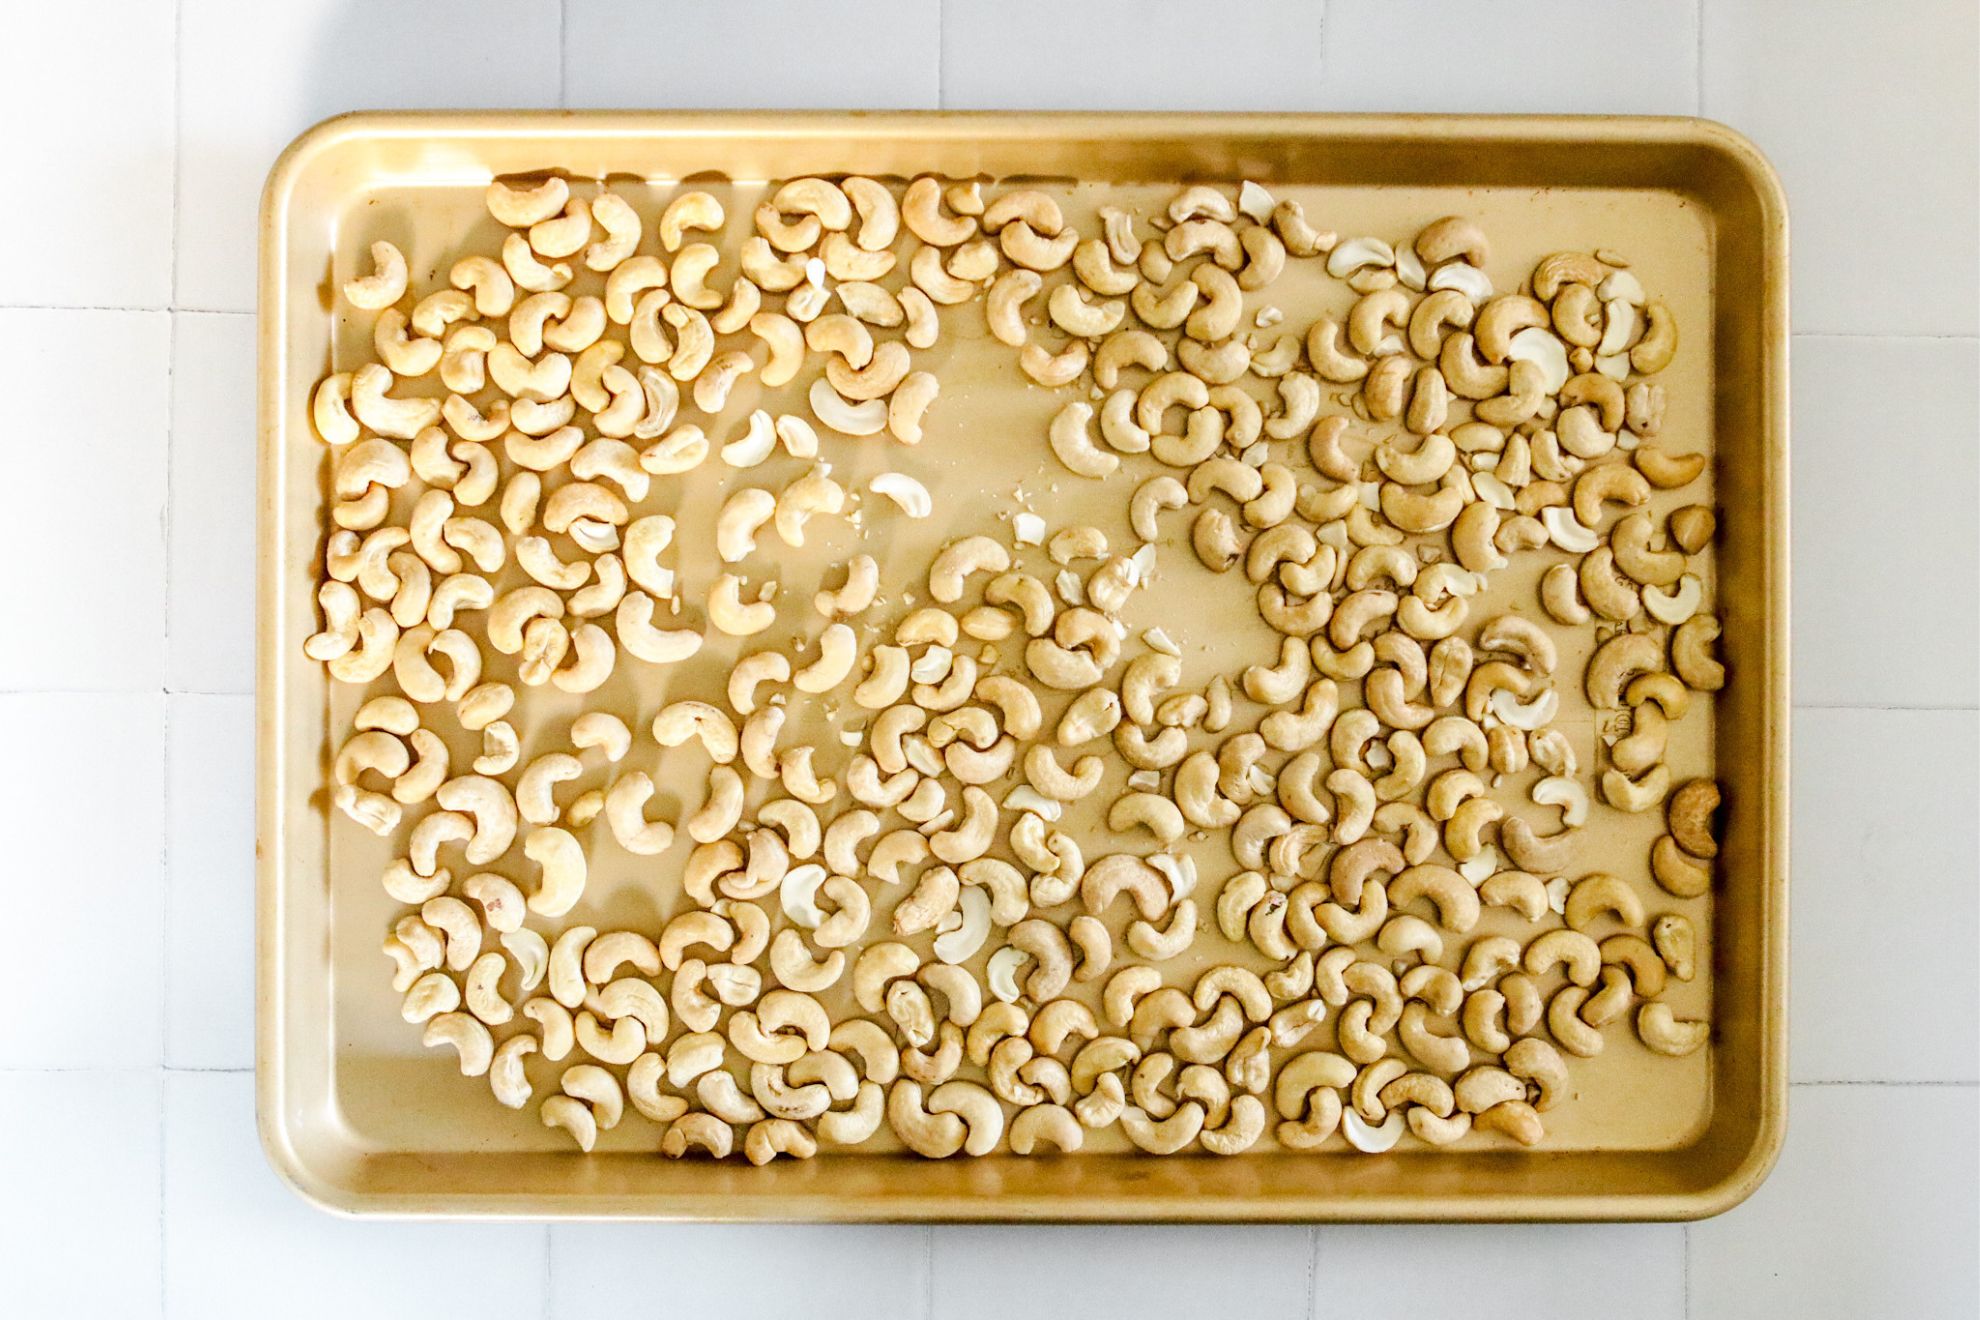 This is an overhead horizontal image of a gold rimmed baking sheet with raw cashews spread across it. The baking sheet sits on a white square tile surface.